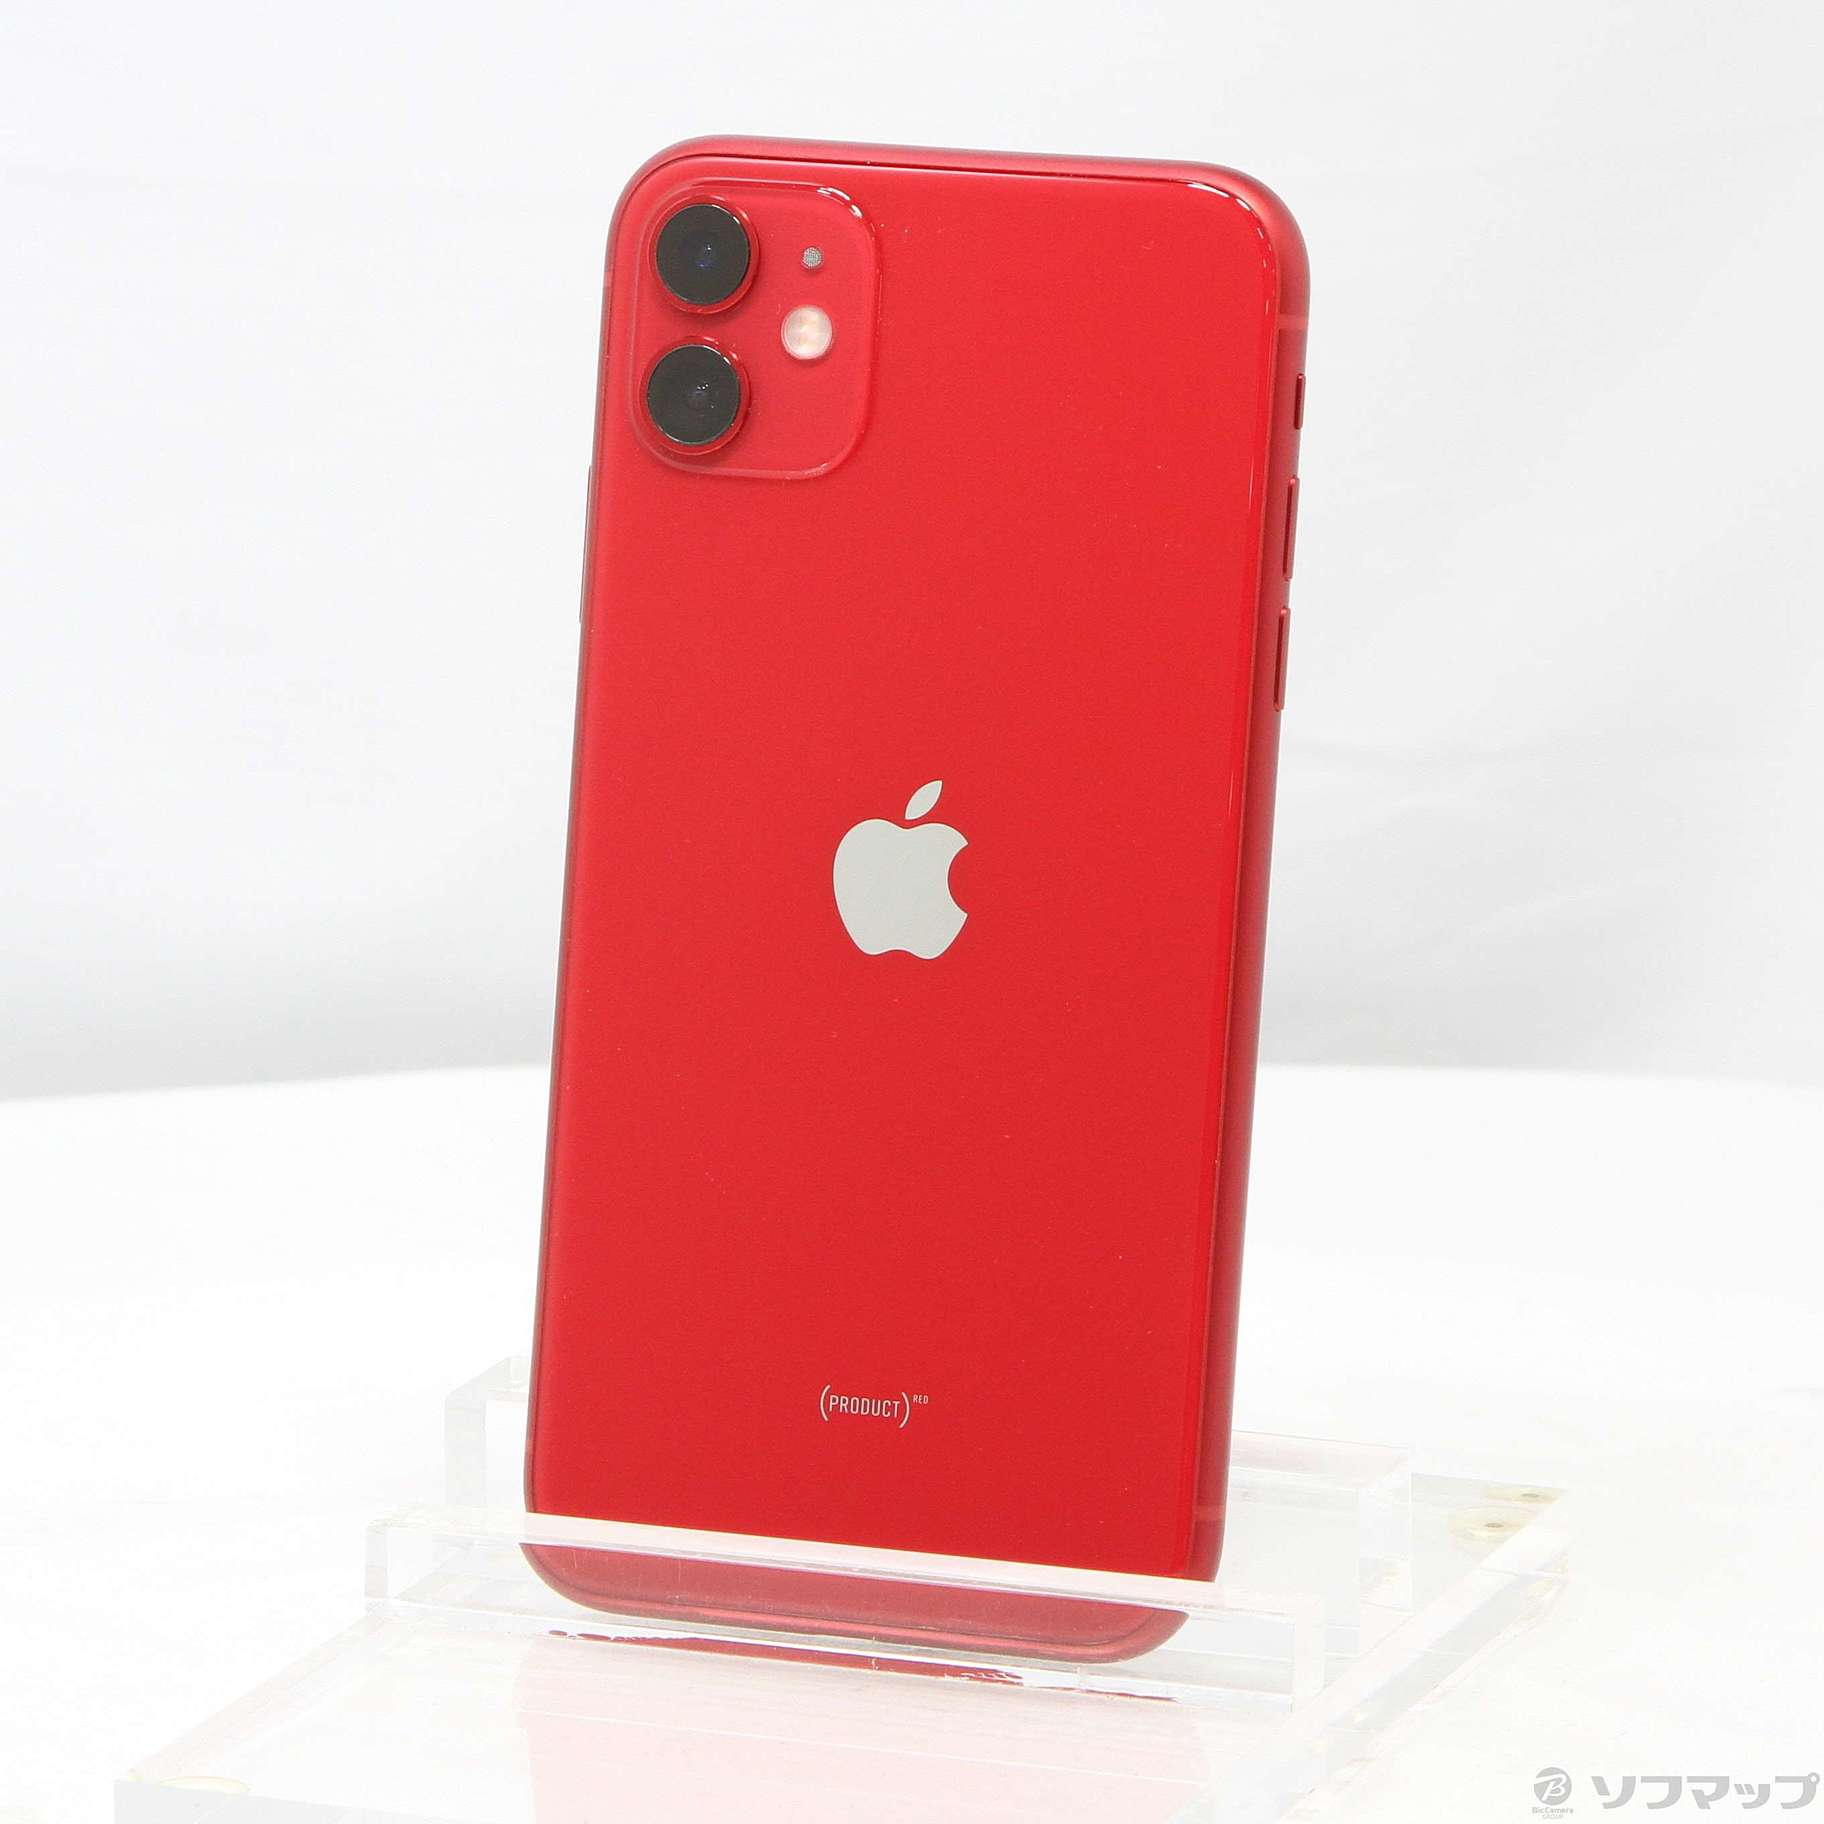 iPhone 11 (PRODUCT)RED 64GB SIMフリー81パーセント